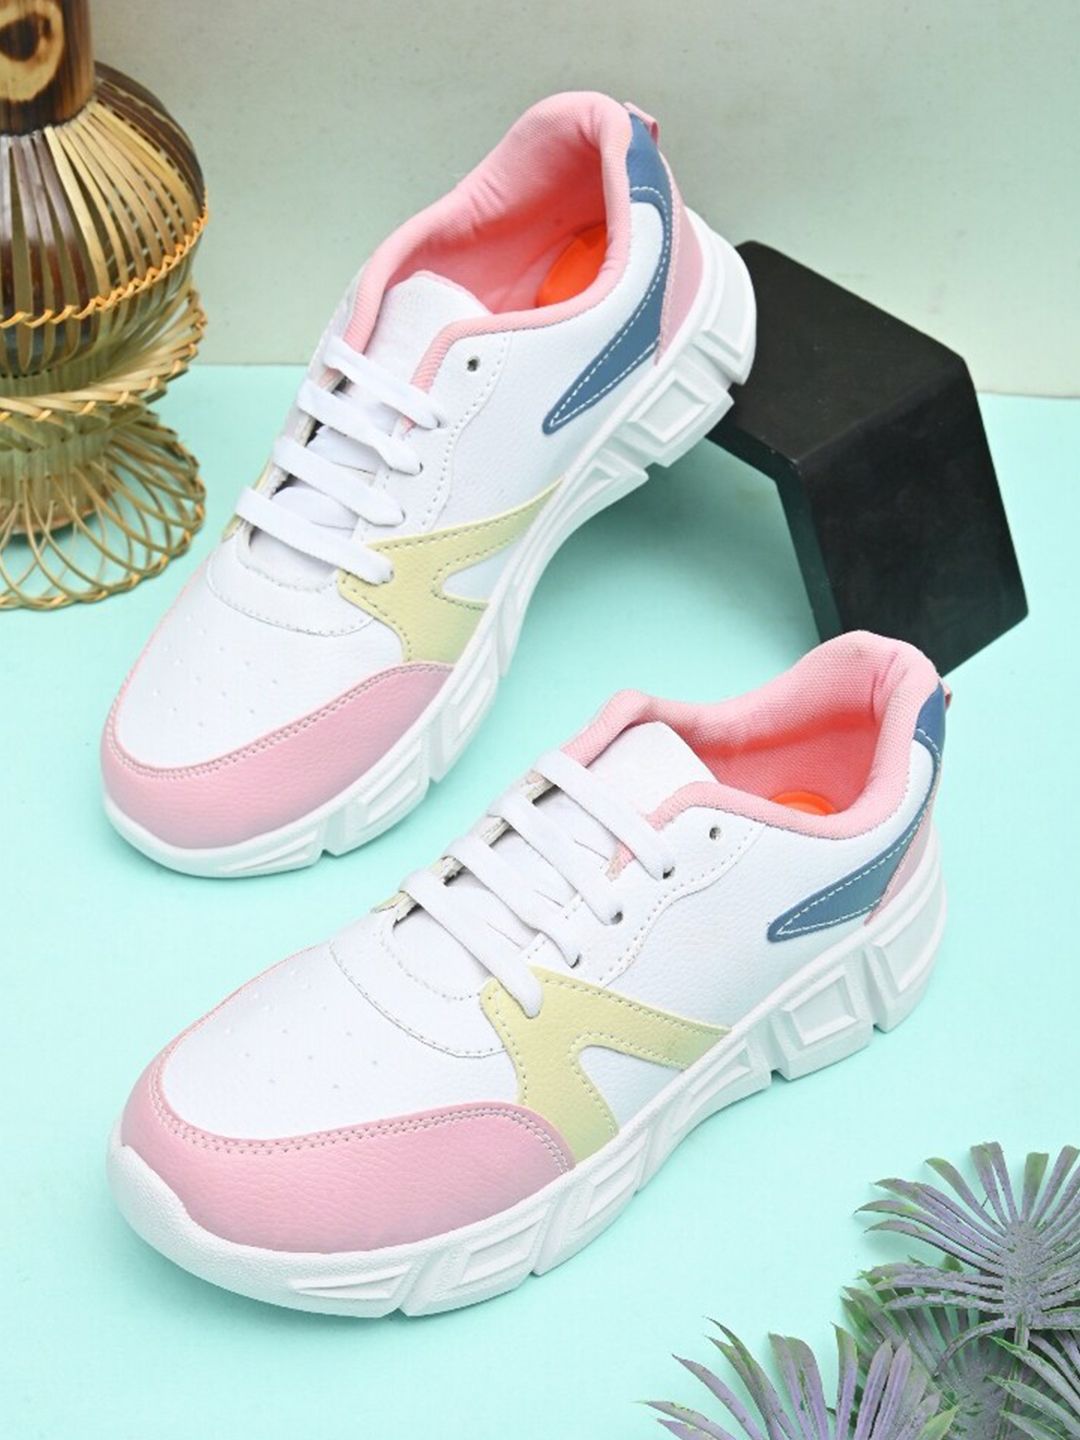 Roadster Women Lace-Ups Walking Non-Marking Shoes Price in India